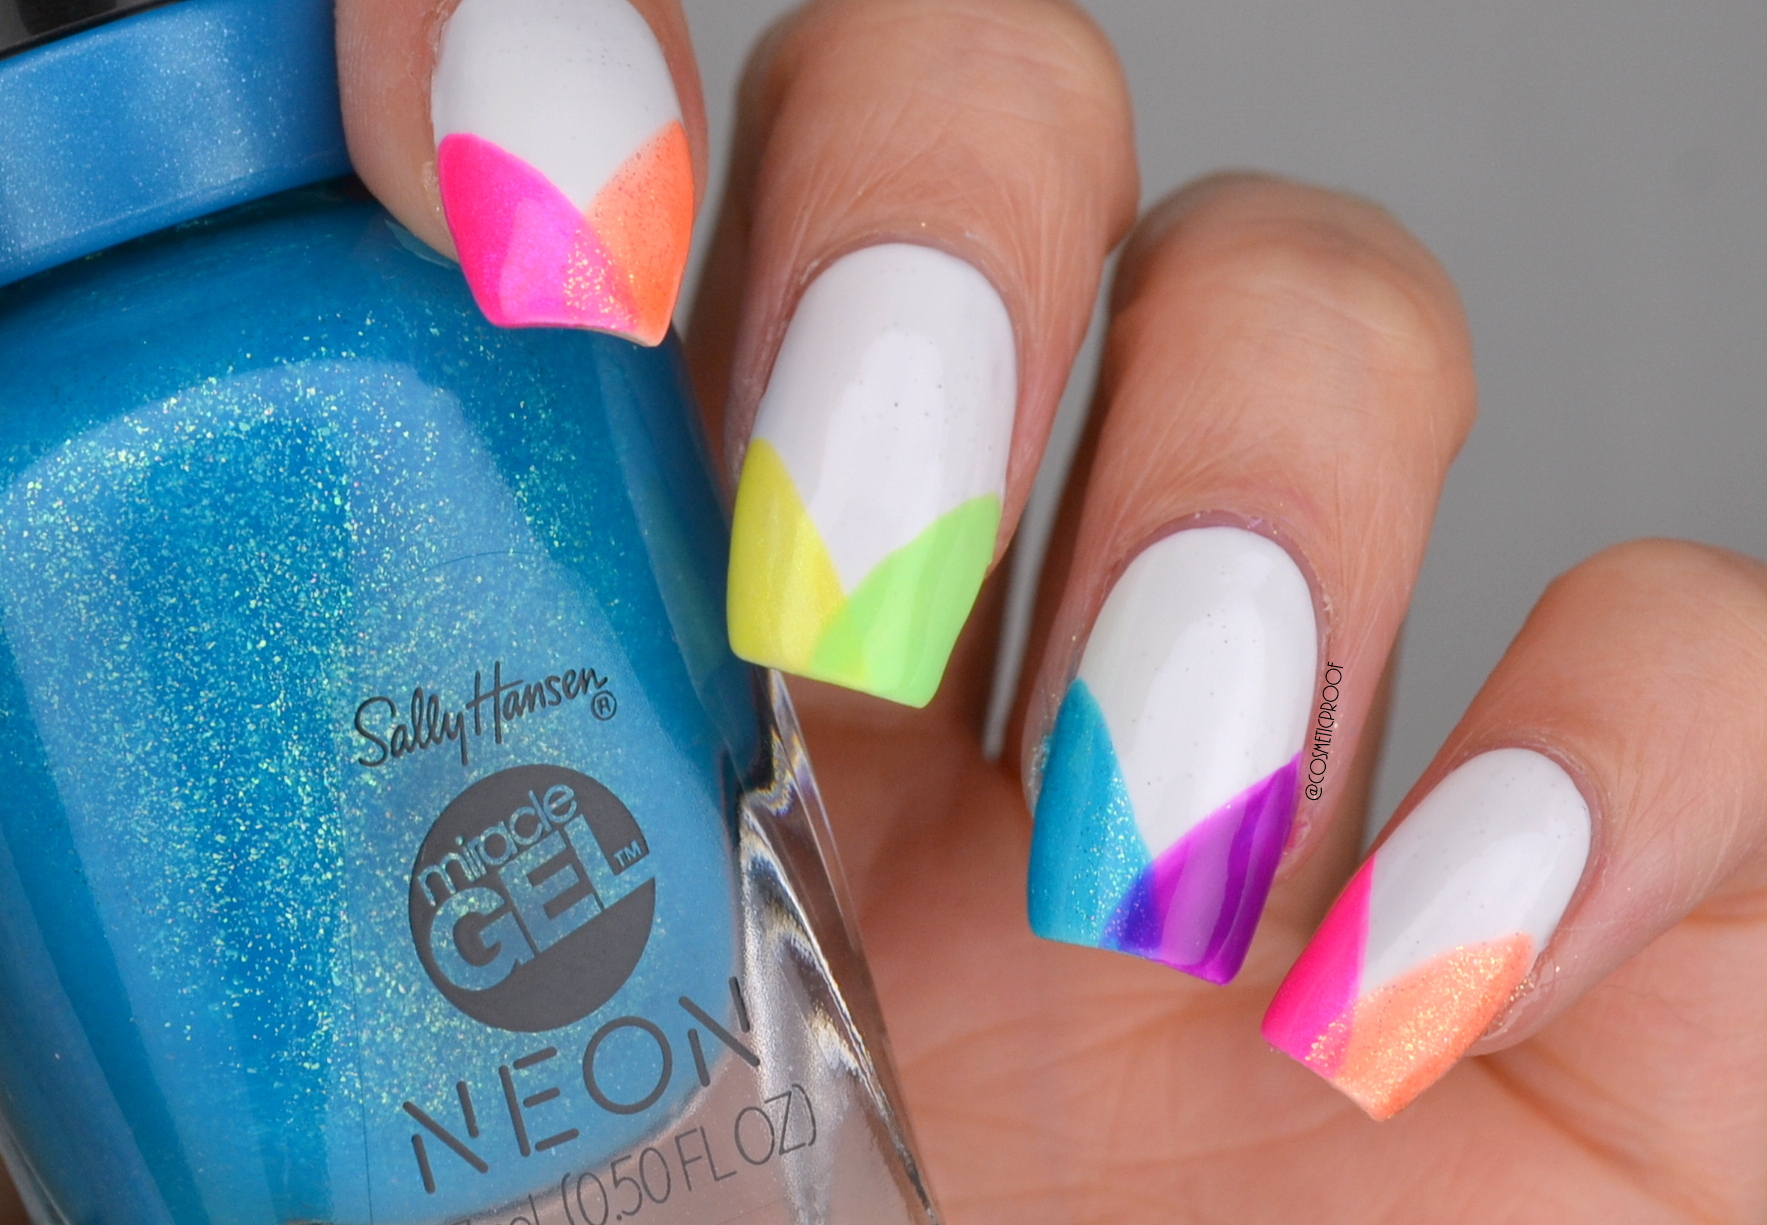 Neon Nail Art Designs for Summer - wide 6